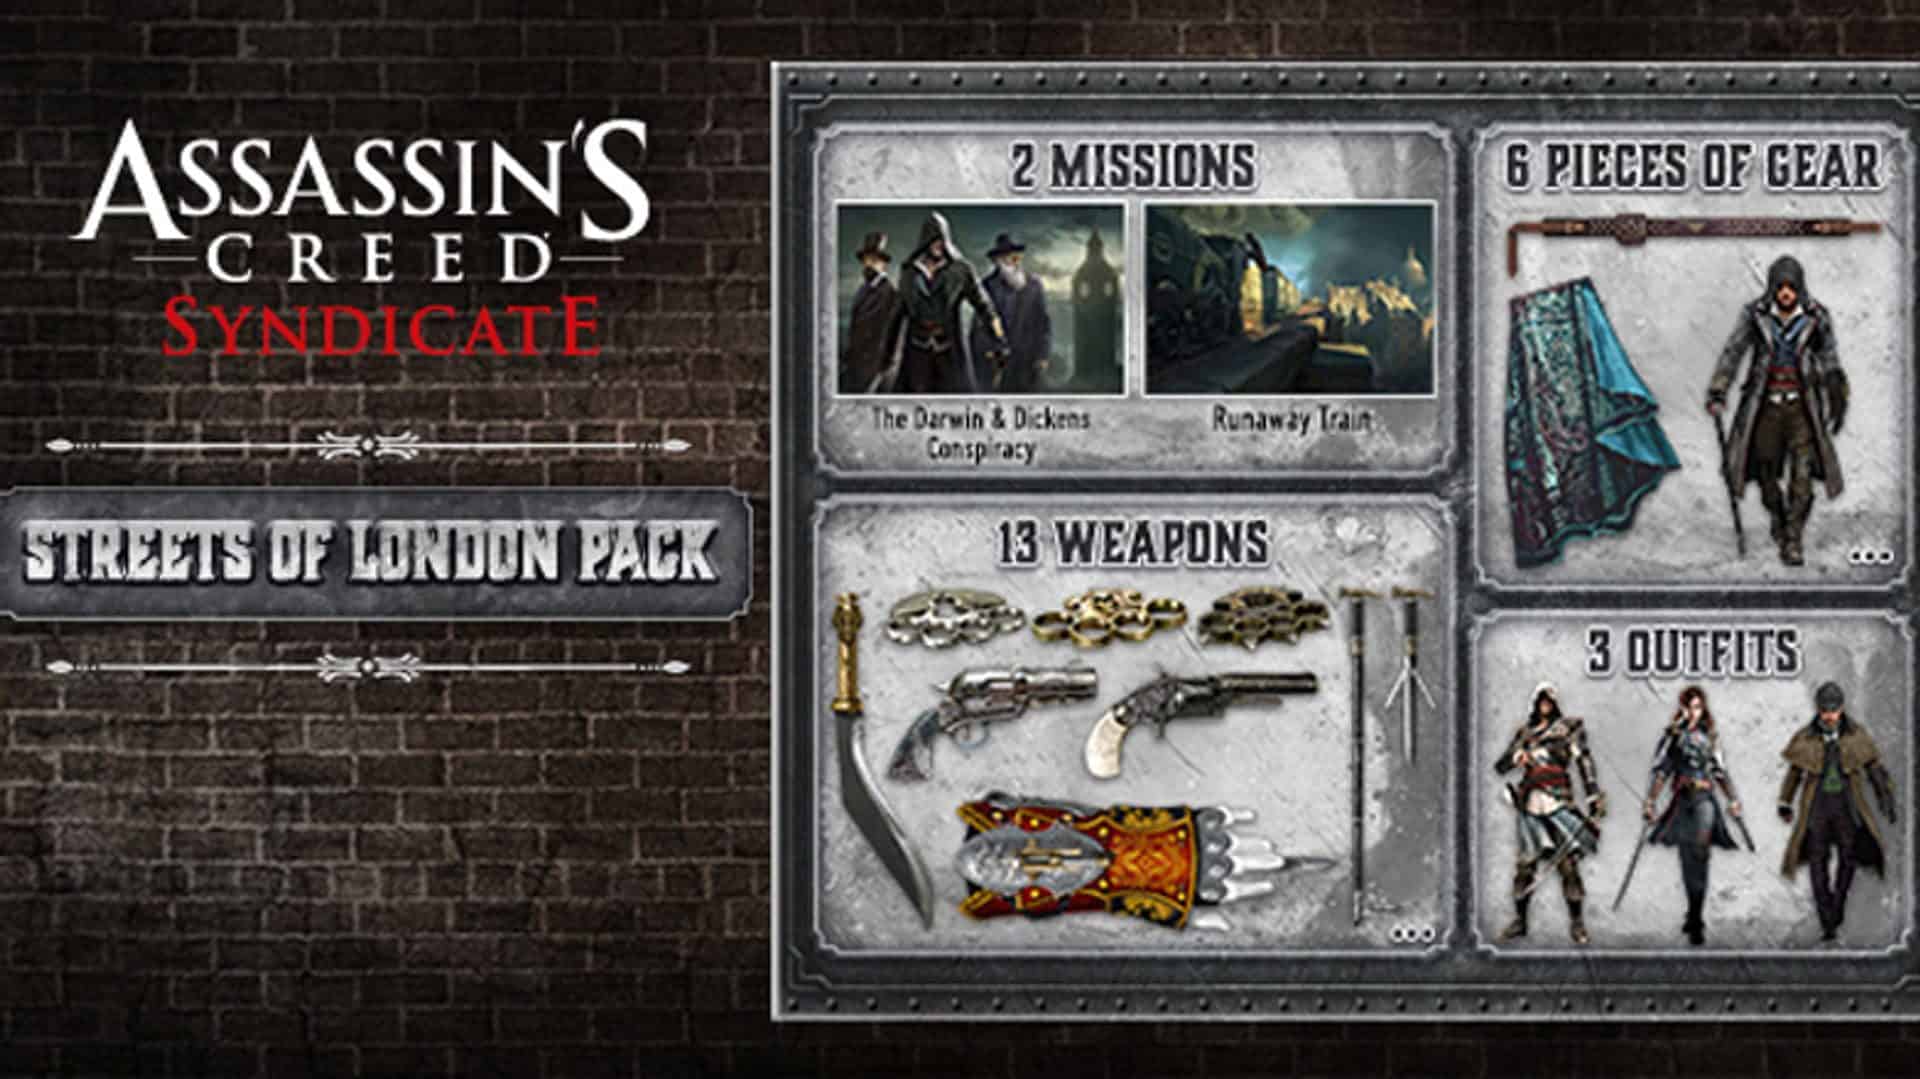 Assassin's Creed: Syndicate - Streets of London Pack